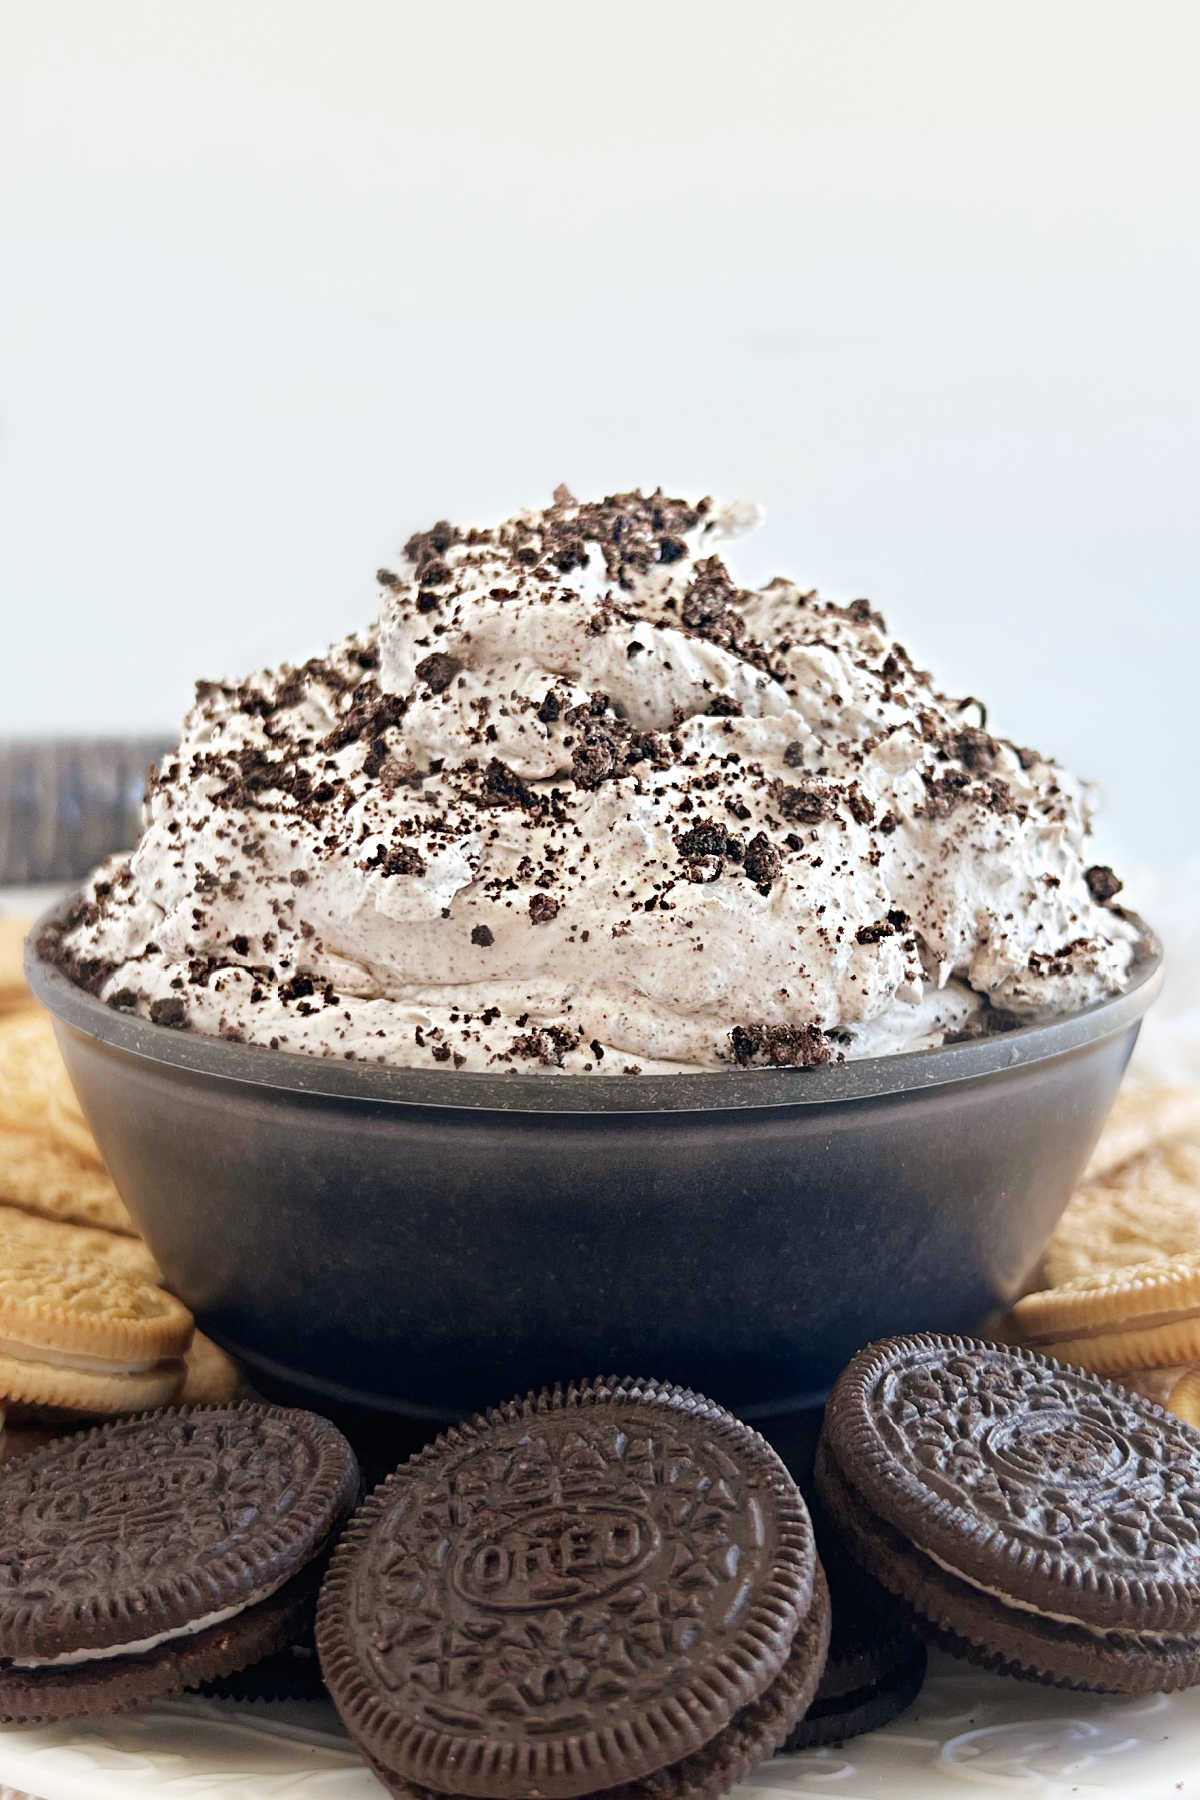 Oreo dip or cookies and cream dip with crushed oreos in a black serving bowl